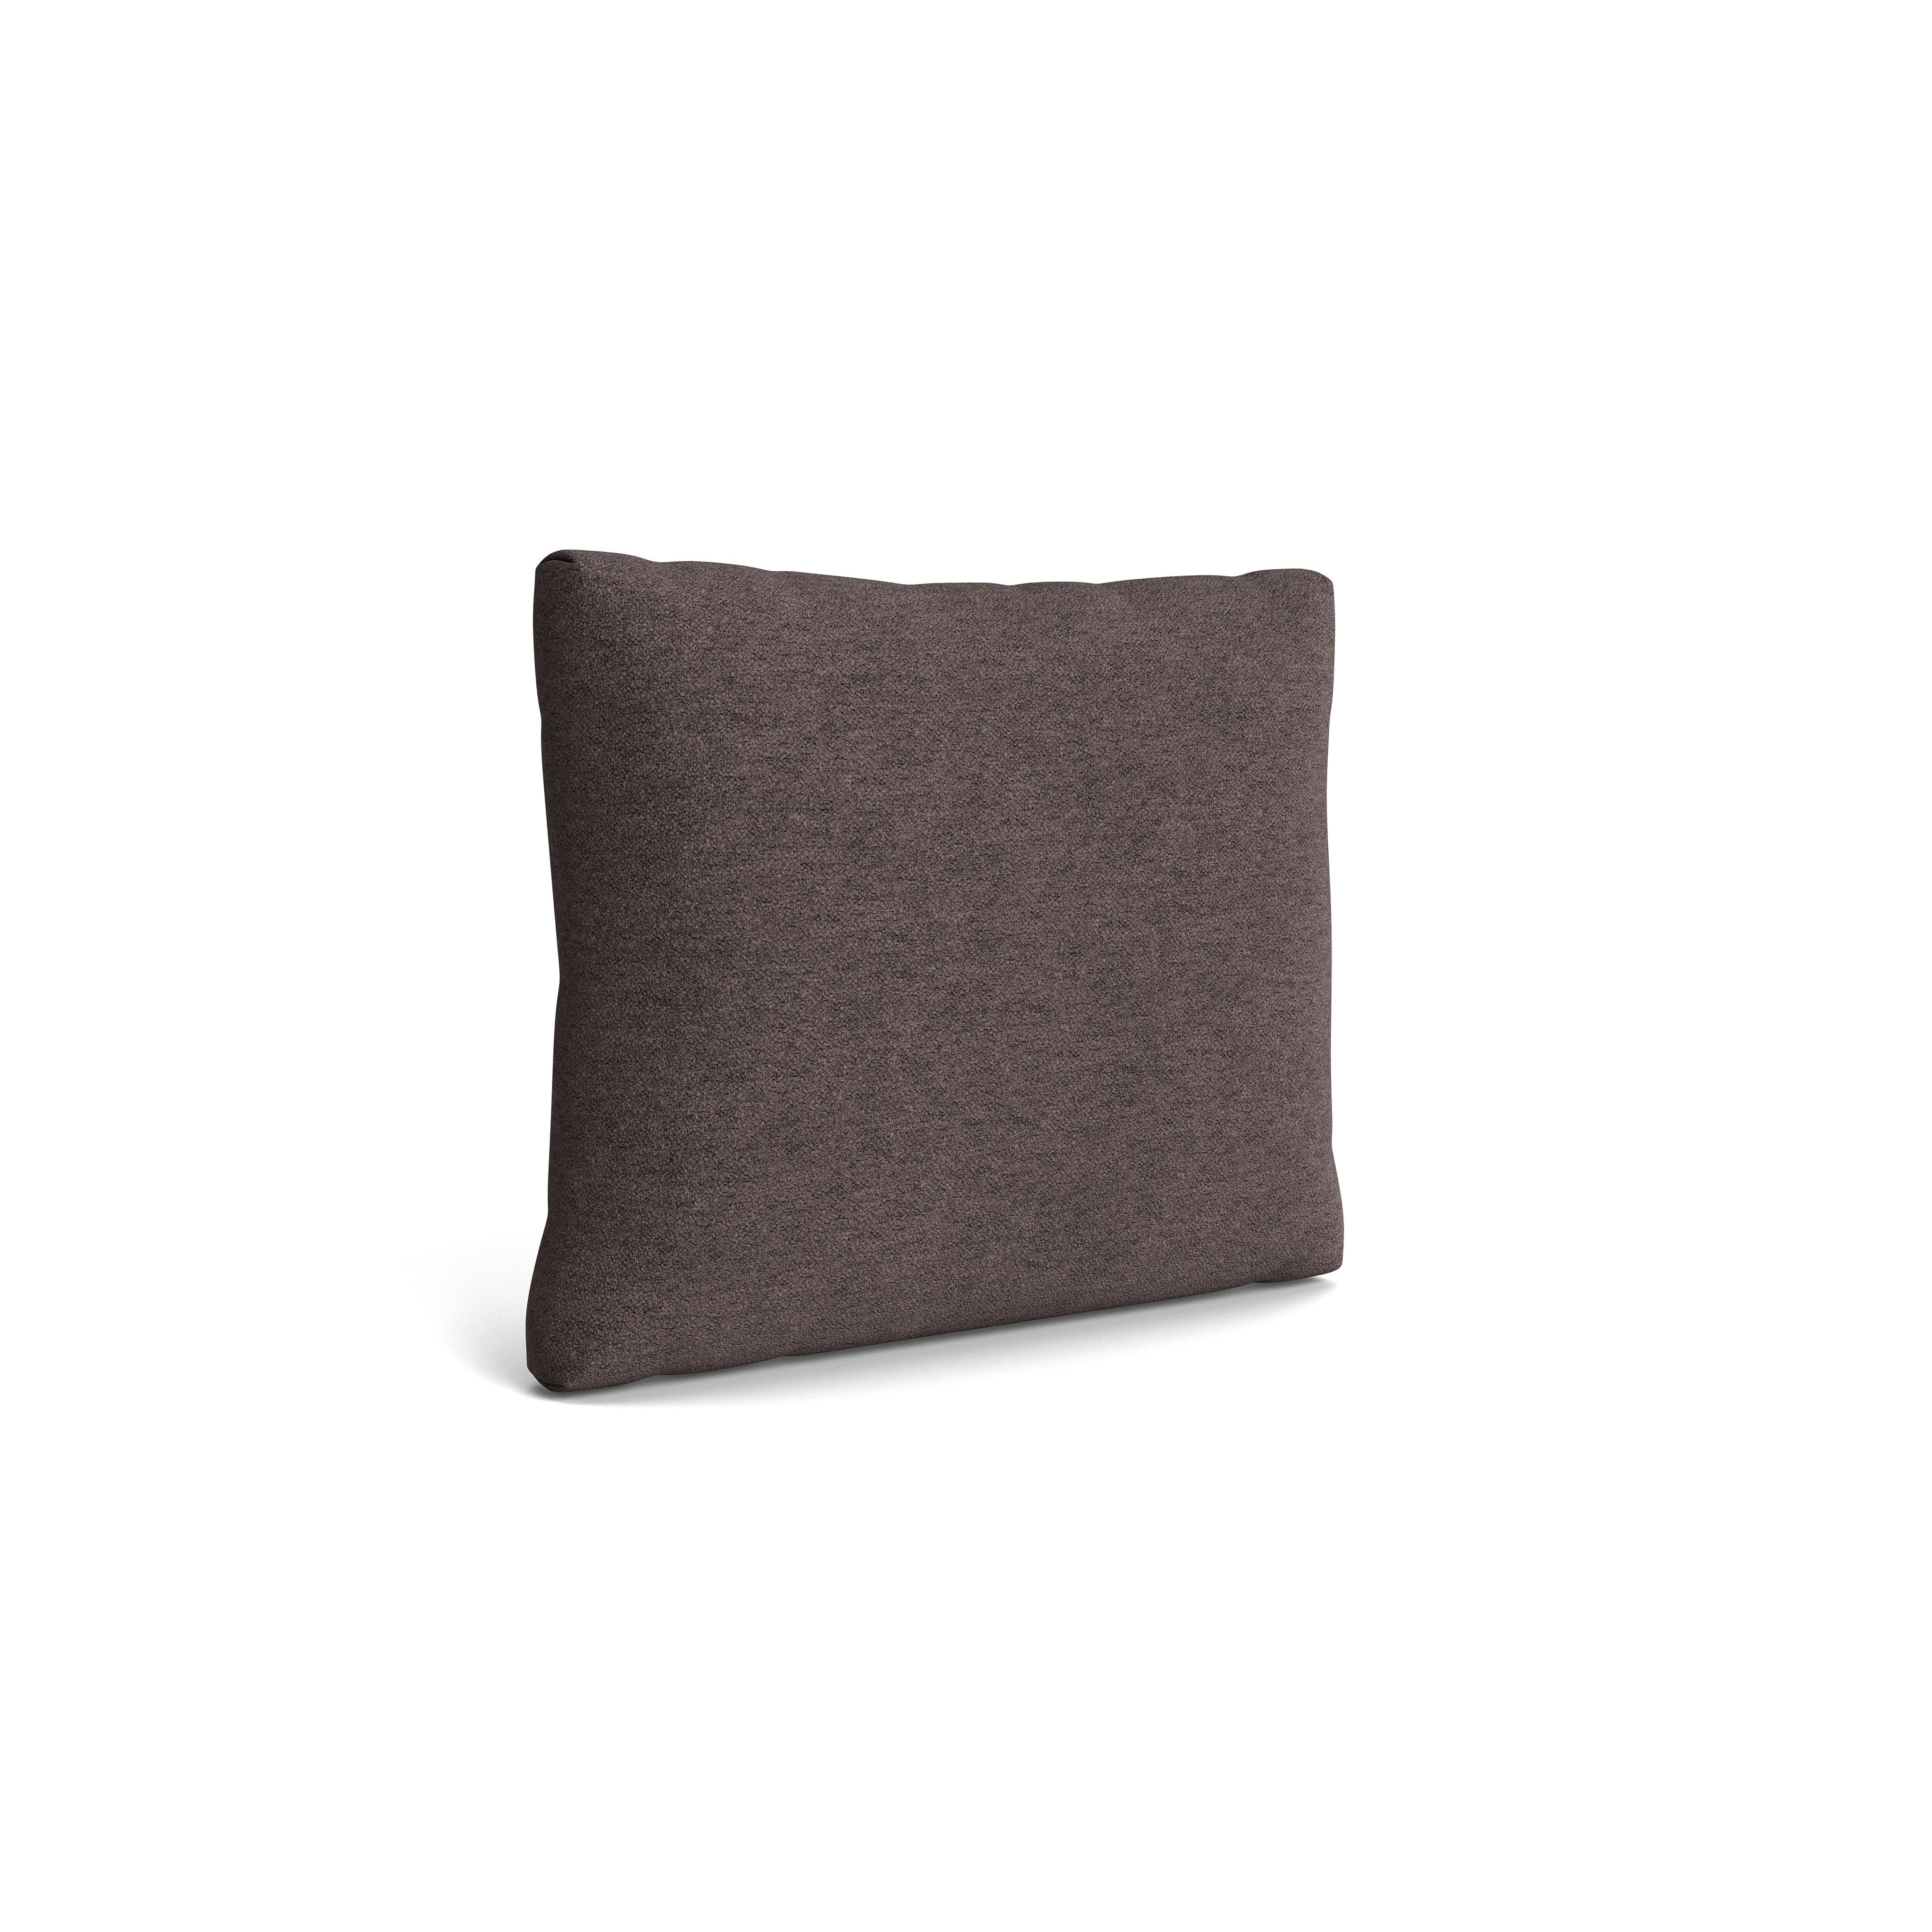 Riff Large Cushion by NORR11
Dimensions: W 60 x H 50 cm.
Materials: Foam and upholstery.
Upholstery: Barnum Boucle Color 3.

Available in different upholstery options. Prices may vary.  Please contact us. 

The Riff Sofa is a study on the classic